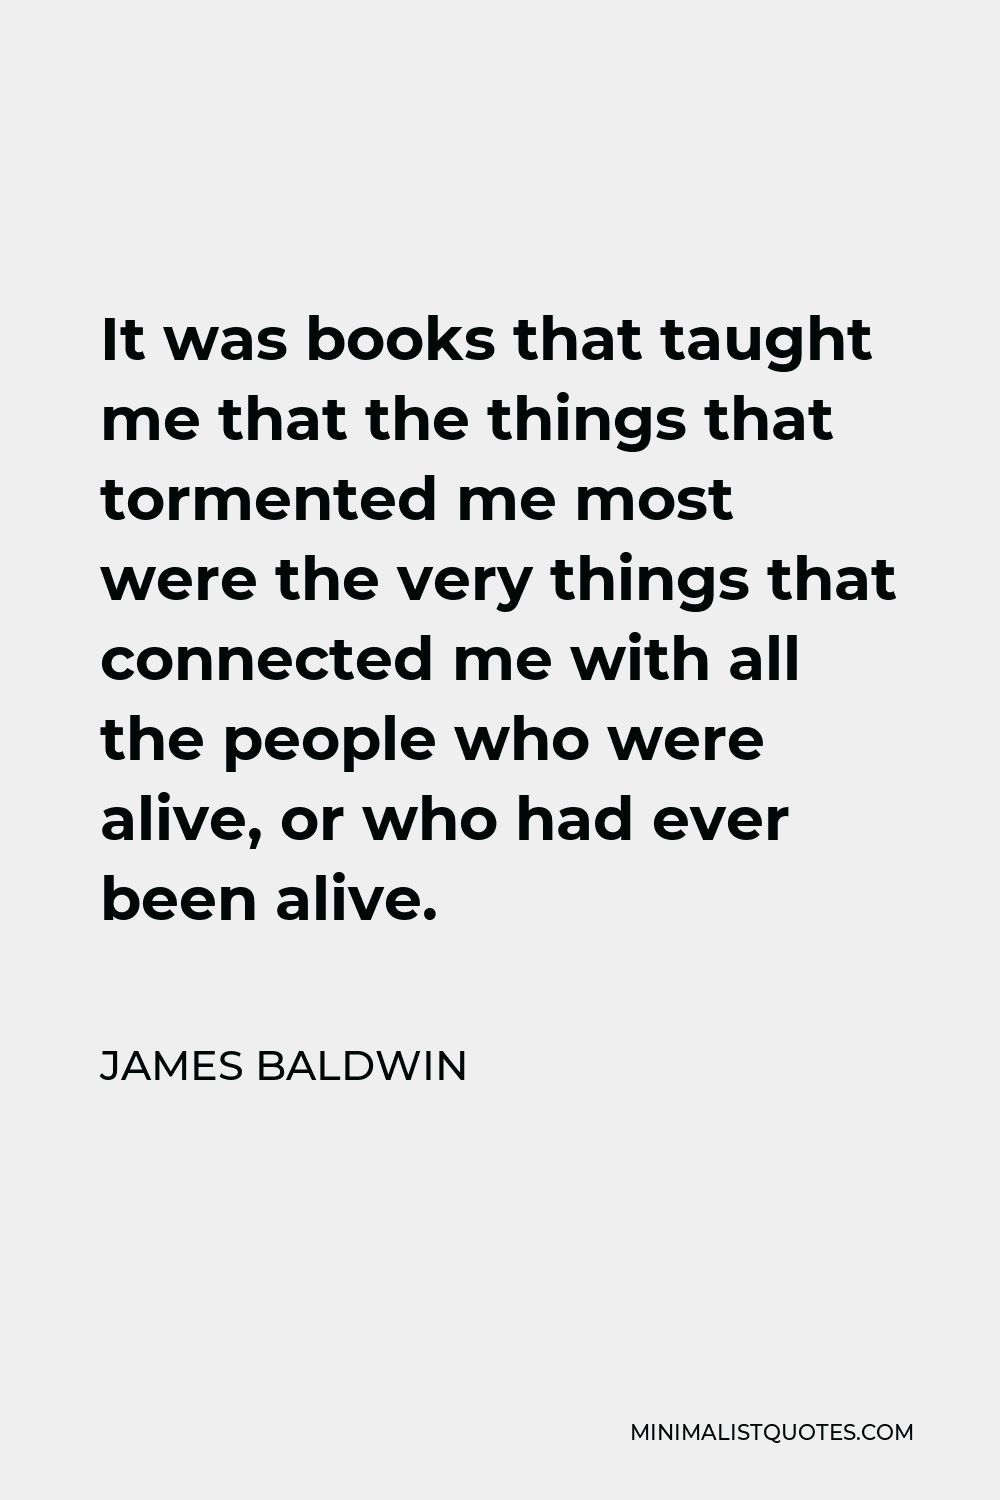 James Baldwin Quote - It was books that taught me that the things that tormented me most were the very things that connected me with all the people who were alive, or who had ever been alive.